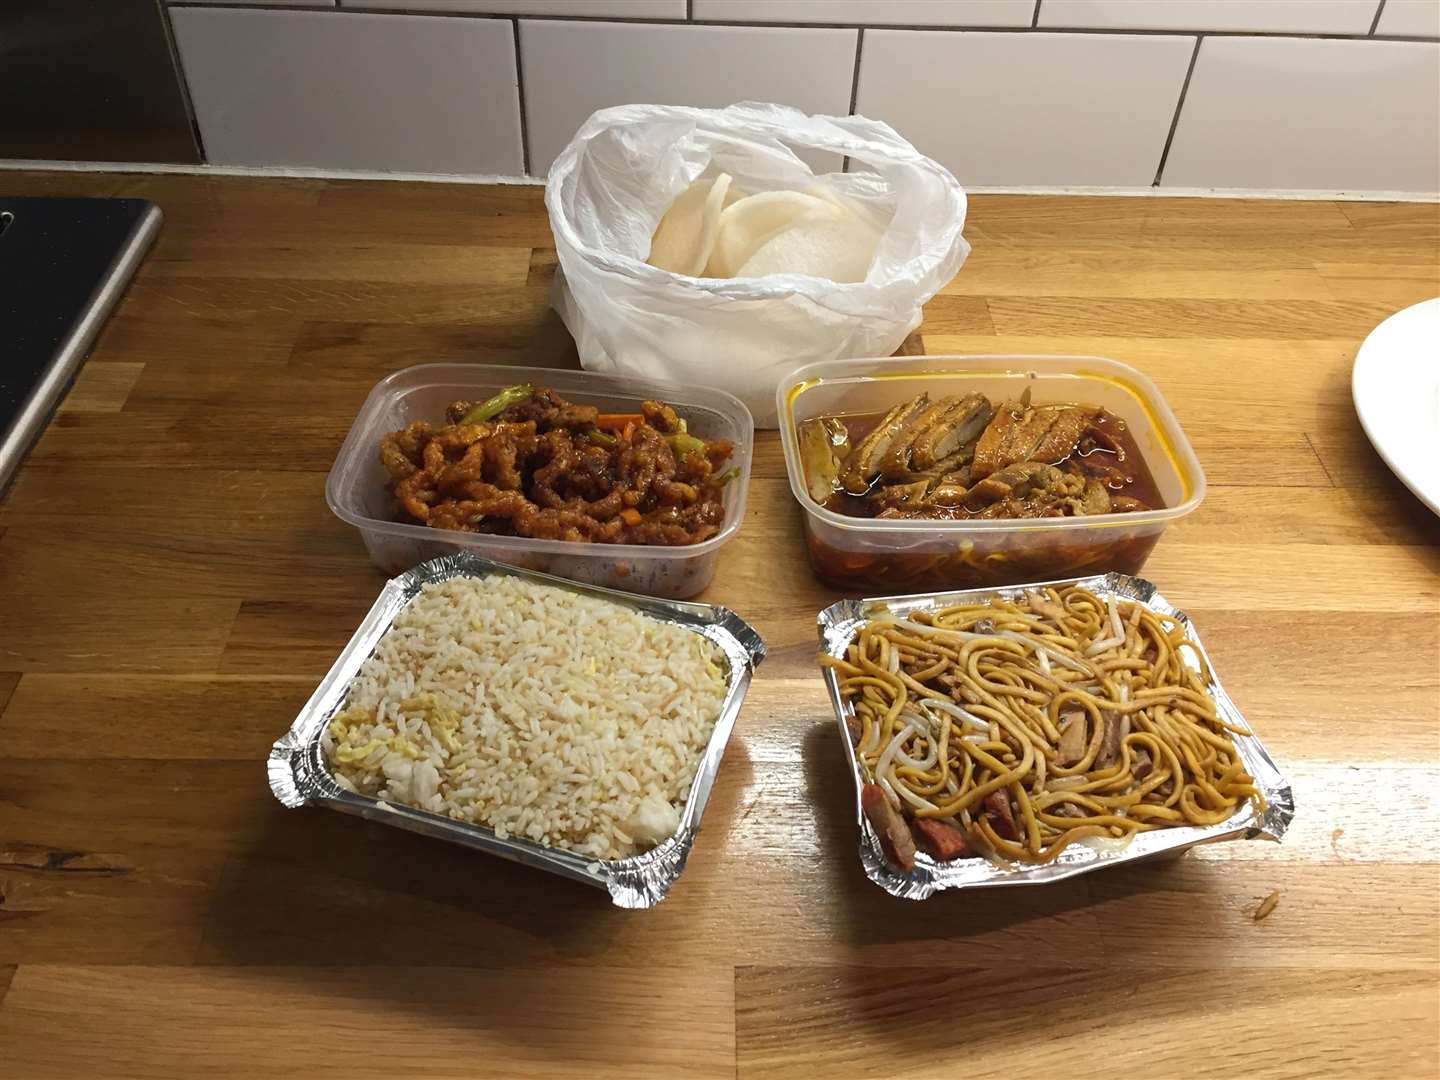 The selection of food I ordered from the Peking Express